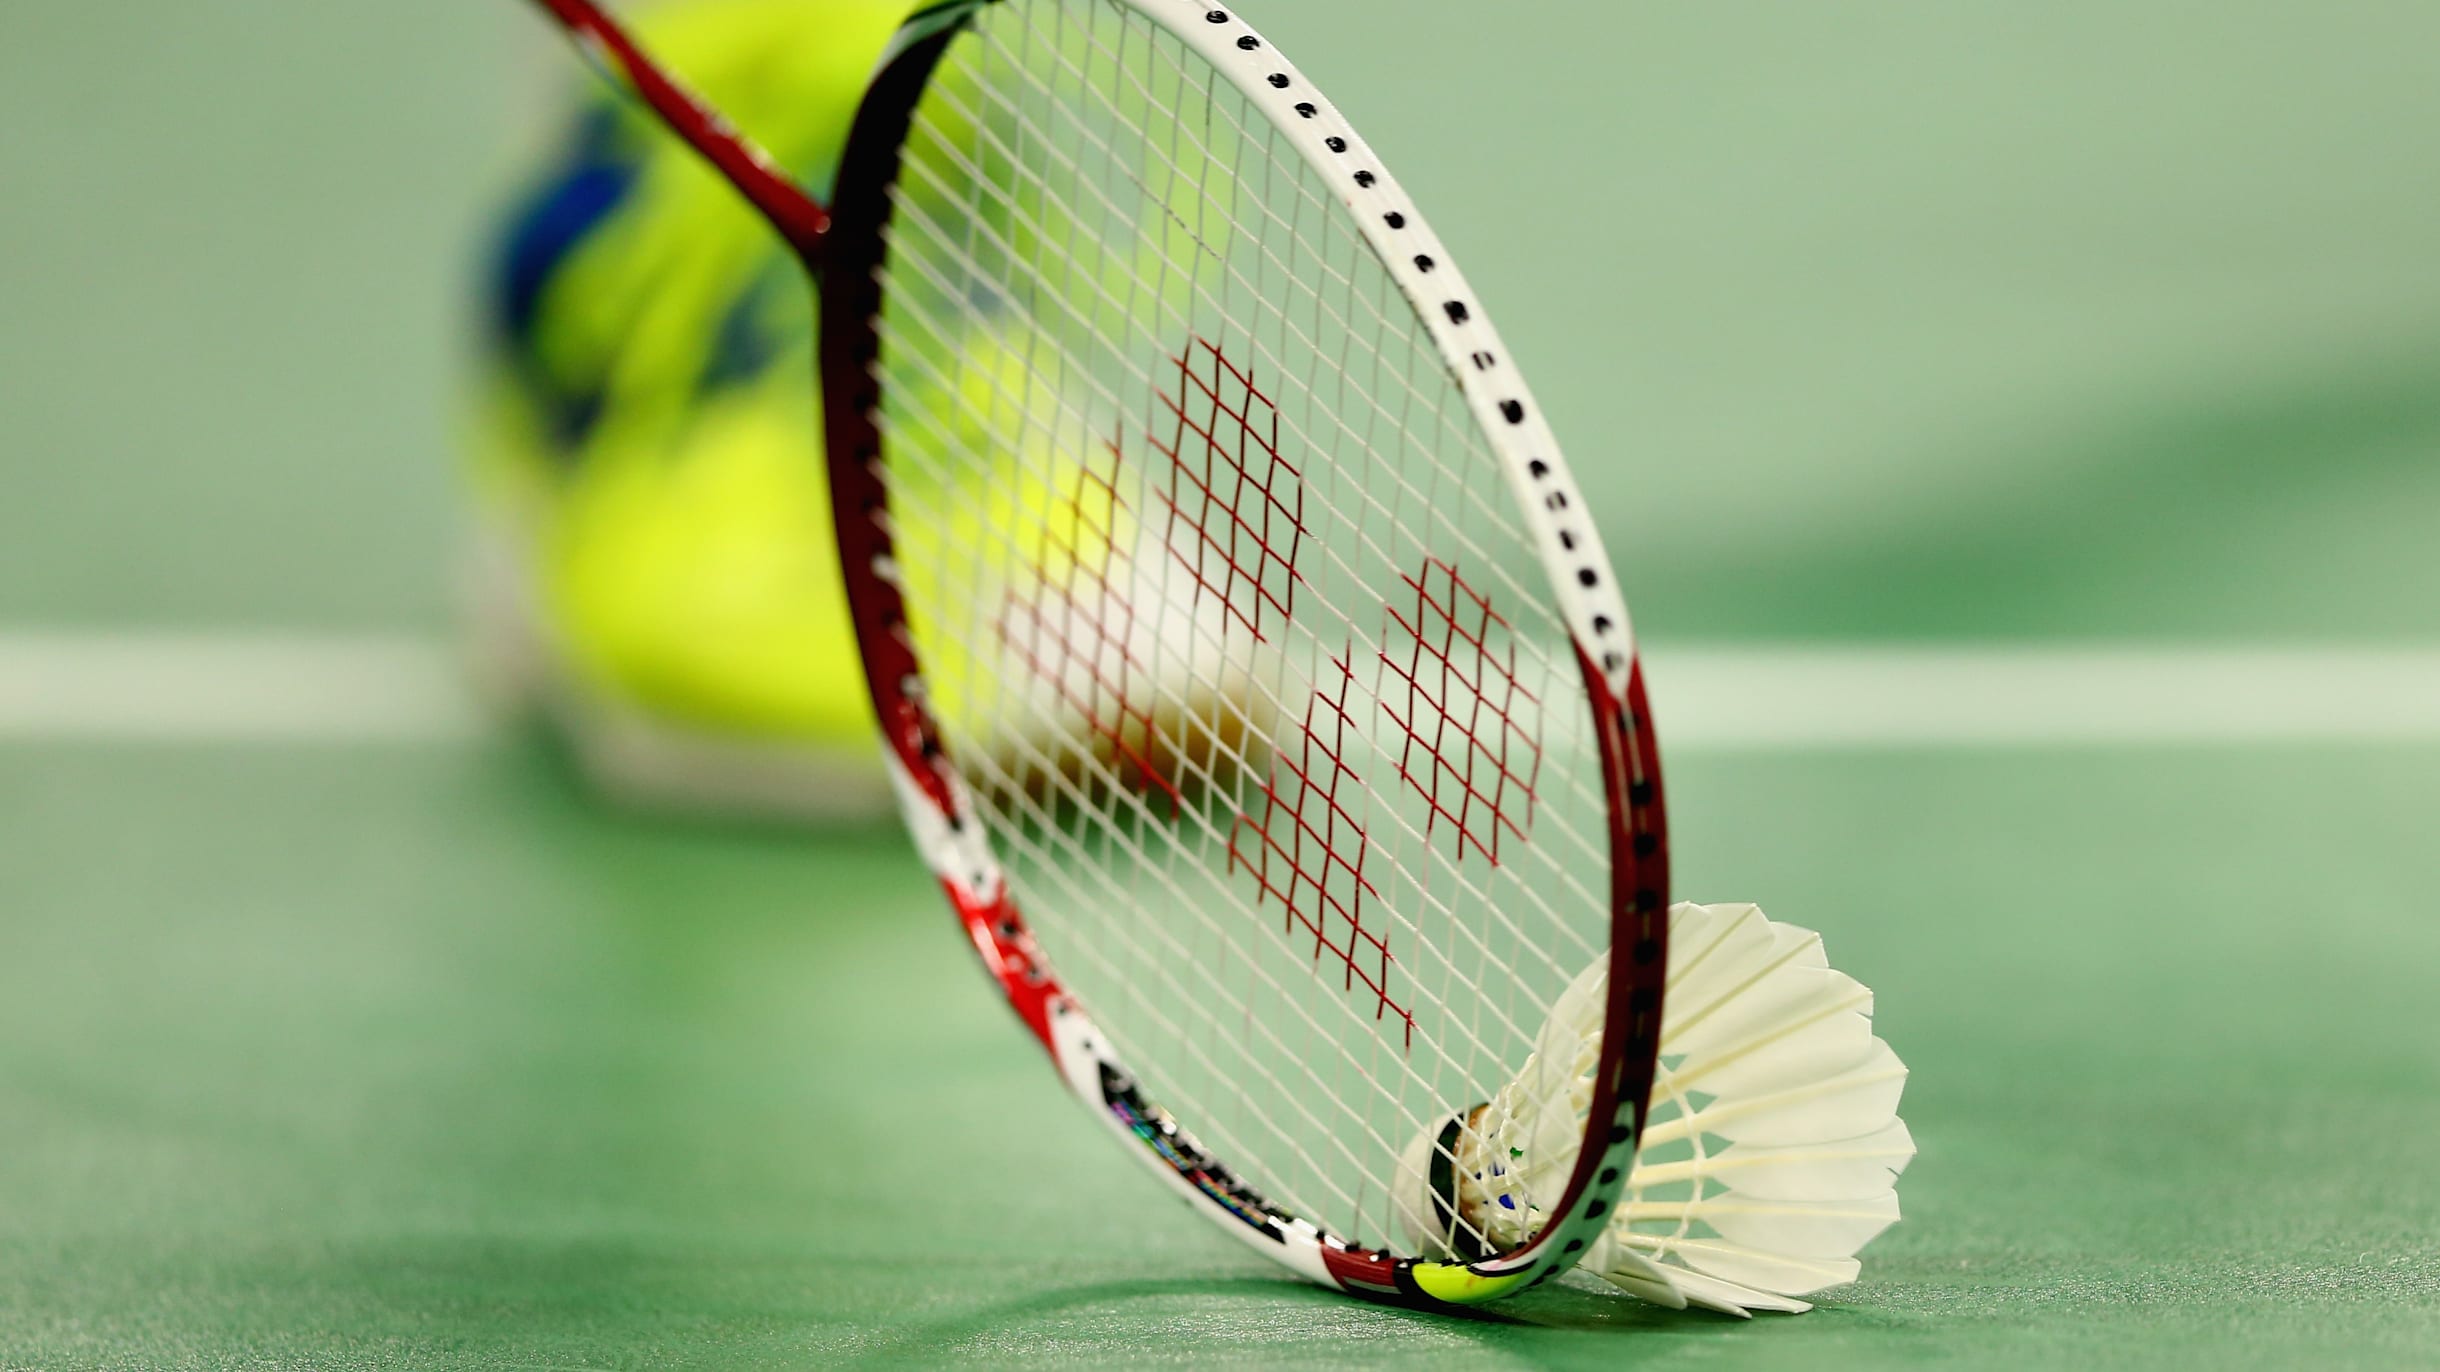 Badminton racket Everything you need to know